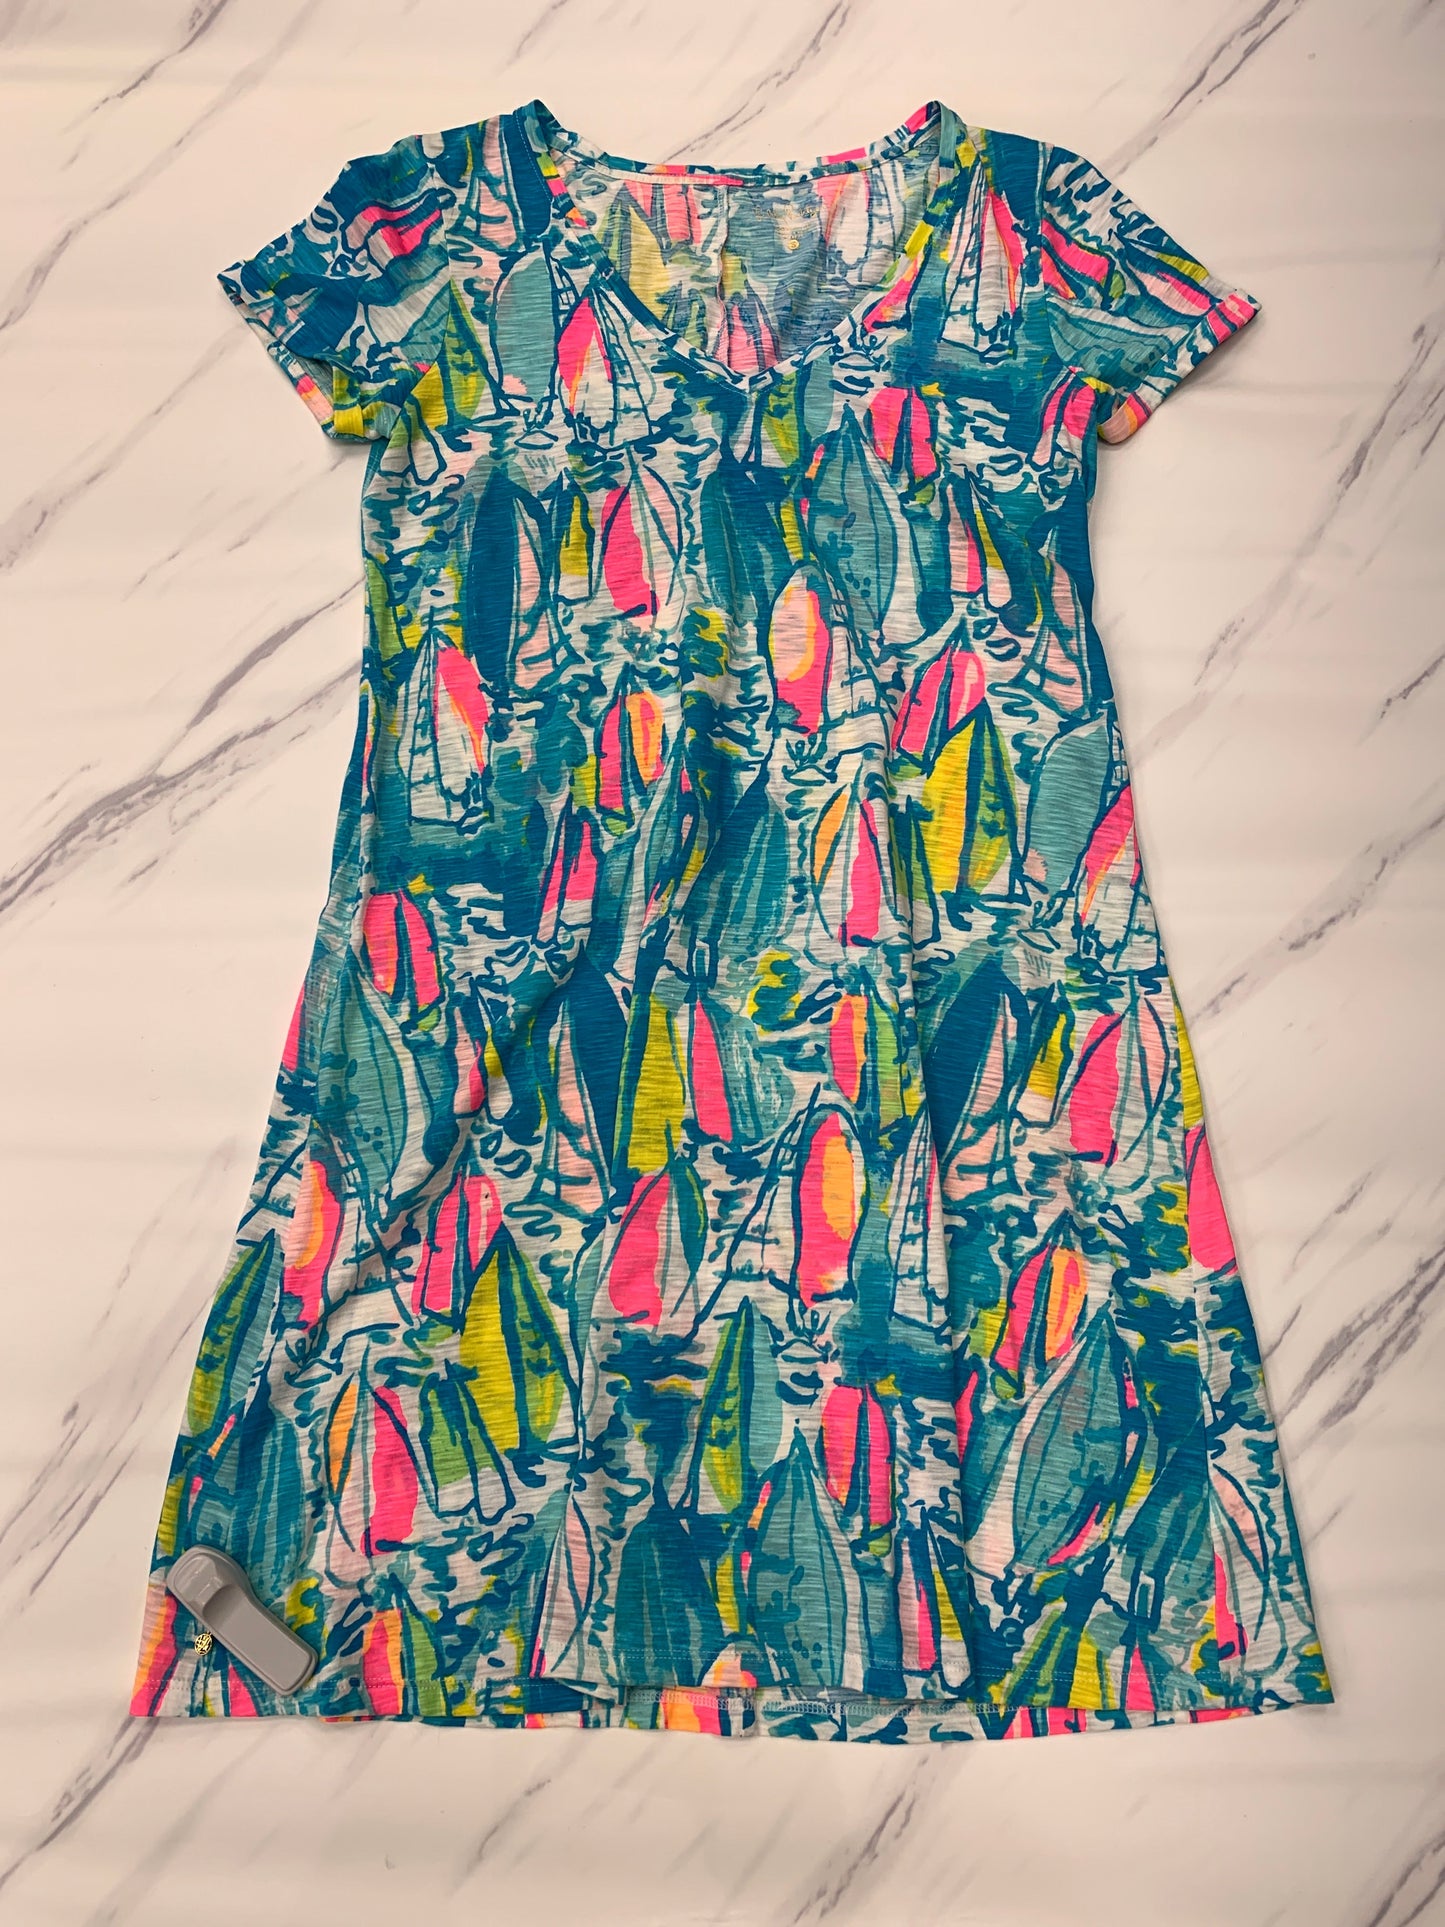 Blue Dress Casual Midi Lilly Pulitzer, Size S